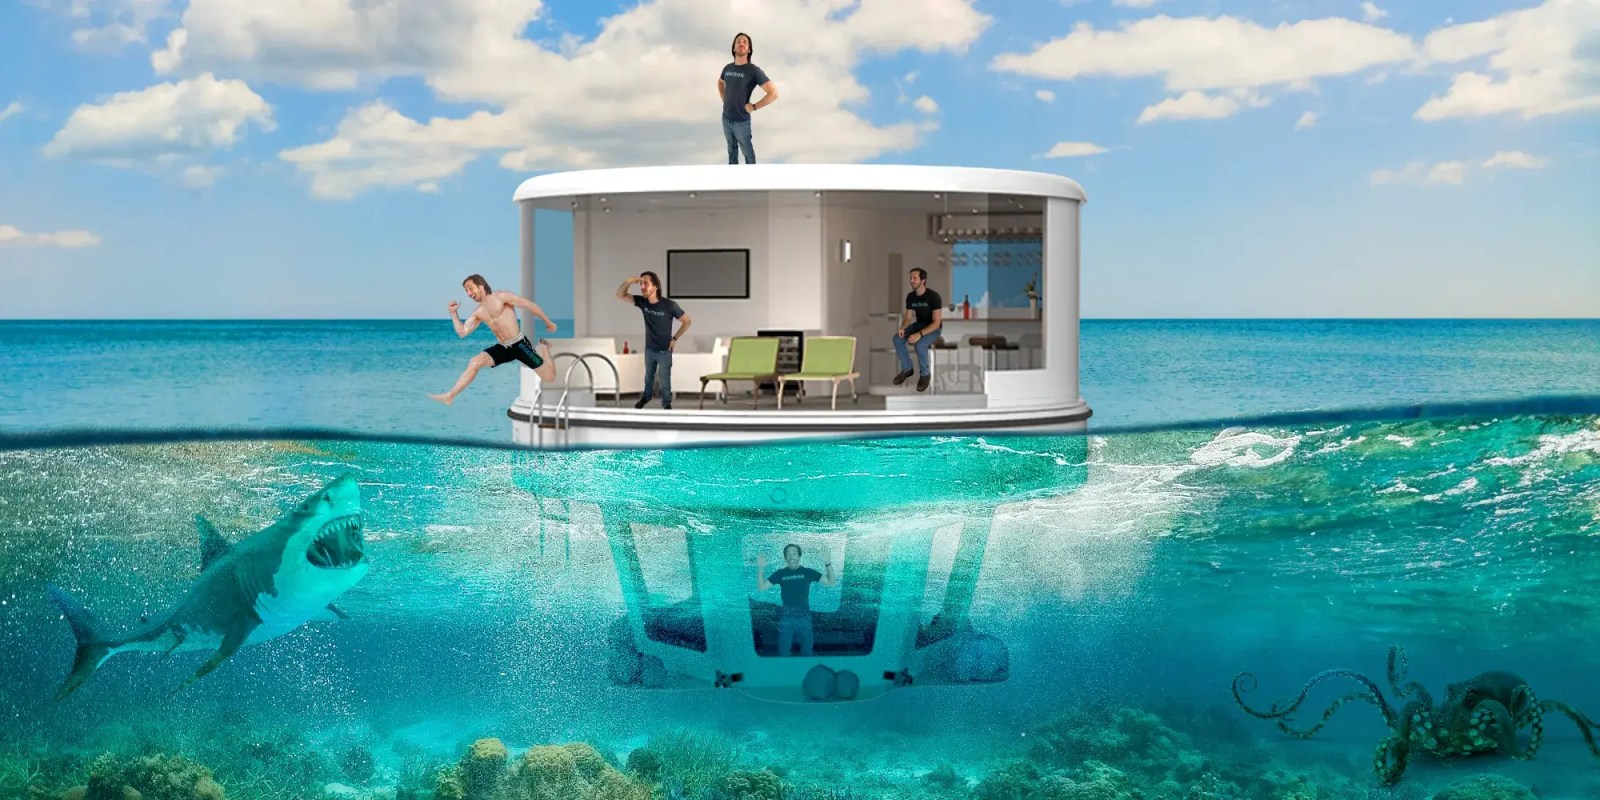 this half-submerged electric houseboat may be the best tiny home ever